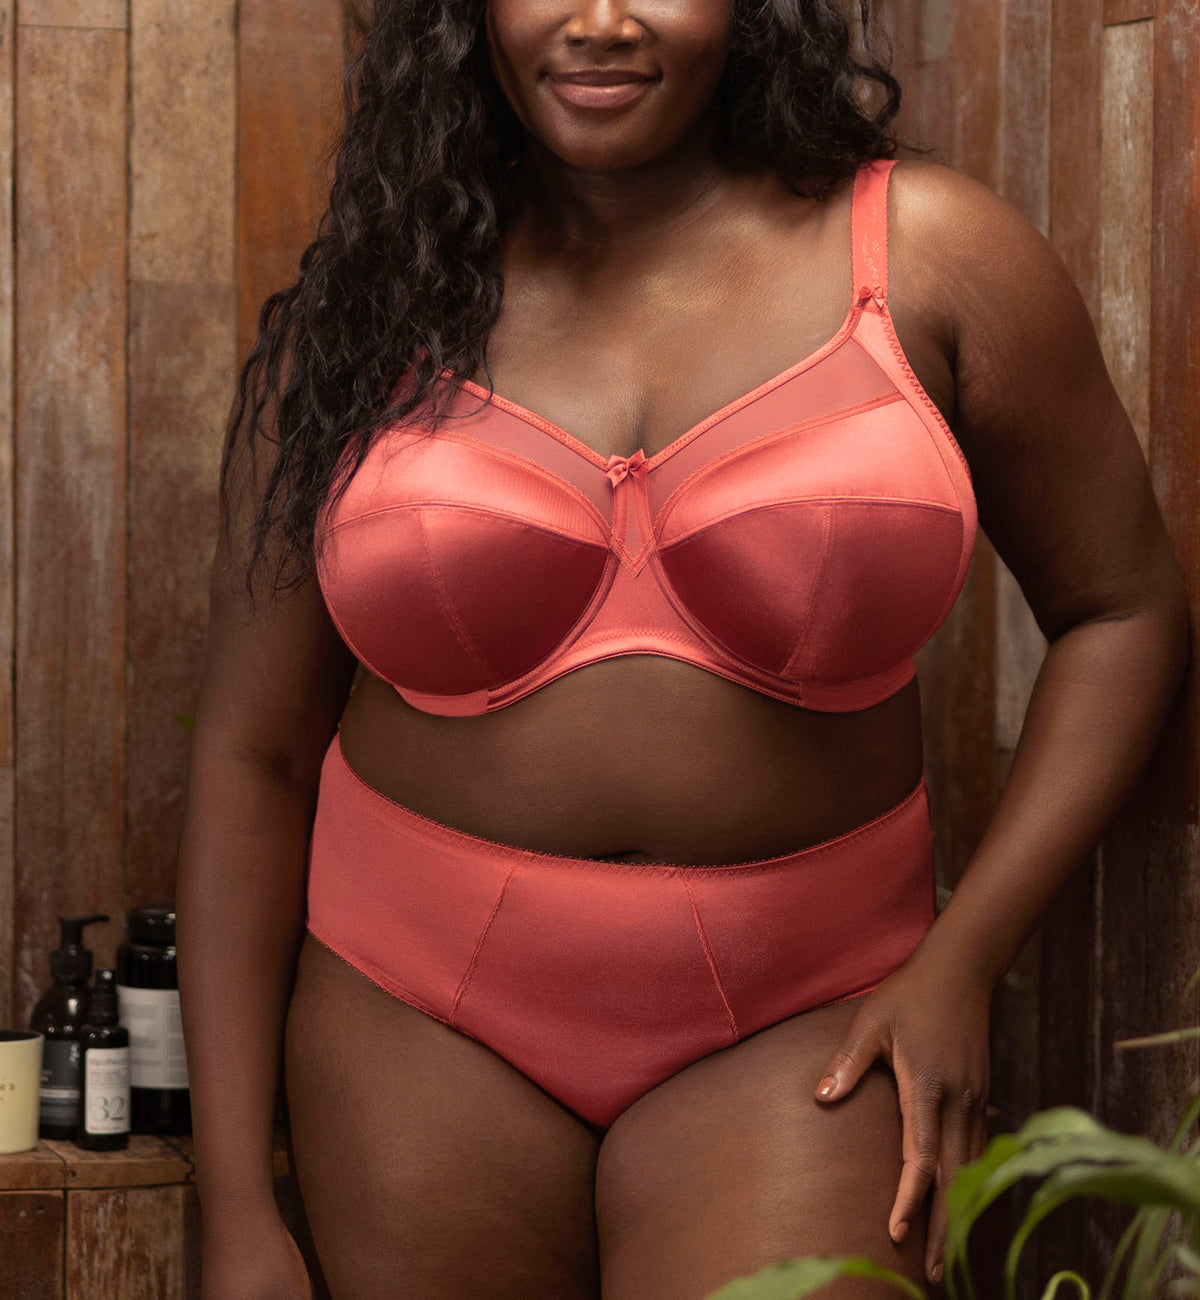 Goddess Keira Support Underwire Bra (6090),34I,Mineral Red - Mineral Red,34I